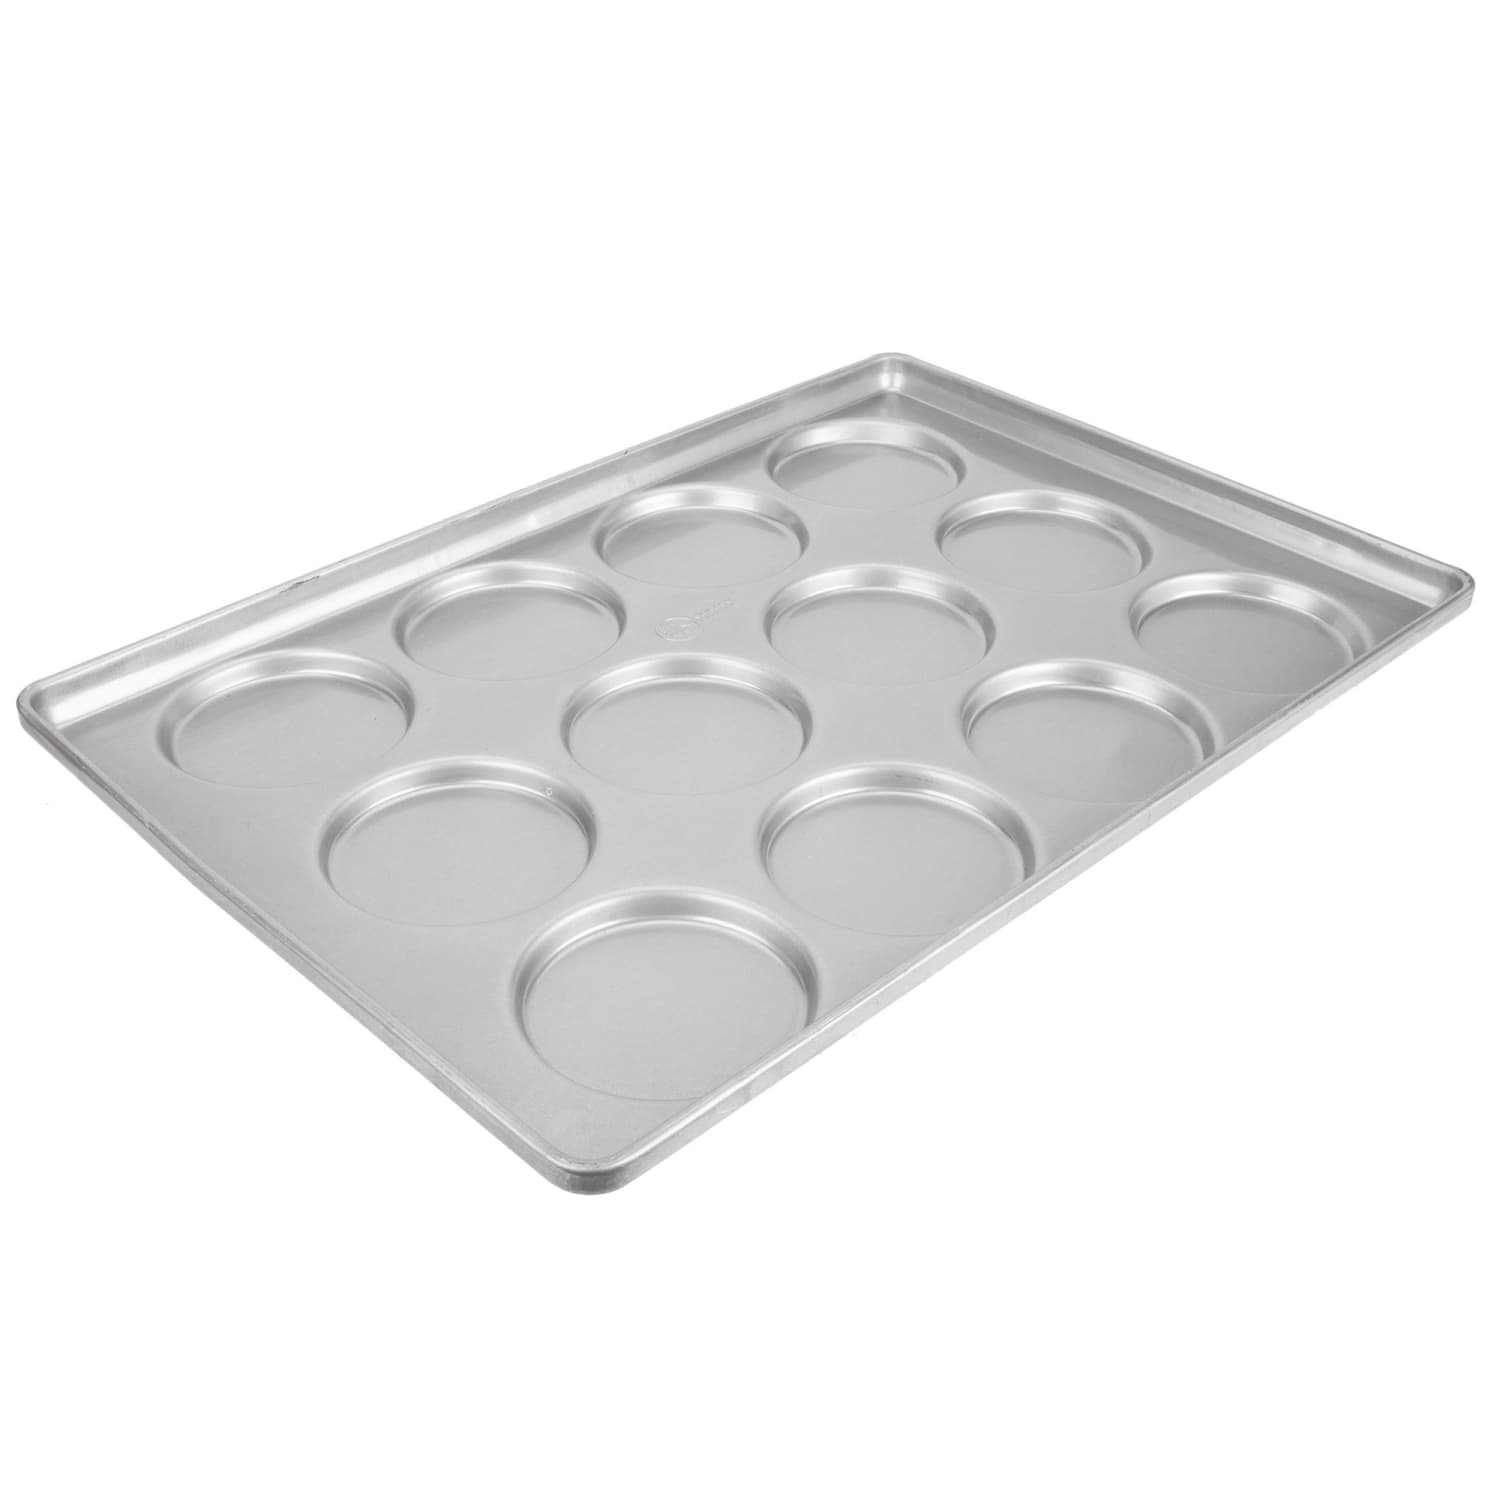 Silicone Muffin Top Pans, Jumbo Size Baking Cake Pan, Non-stick Bakeware  Egg Baking Pan, Great For Eggs, Hamburger Bun, Muffin Top And More, Baking  Tools, Kitchen Gadgets, Kitchen Accessories, Home Kitchen Items 